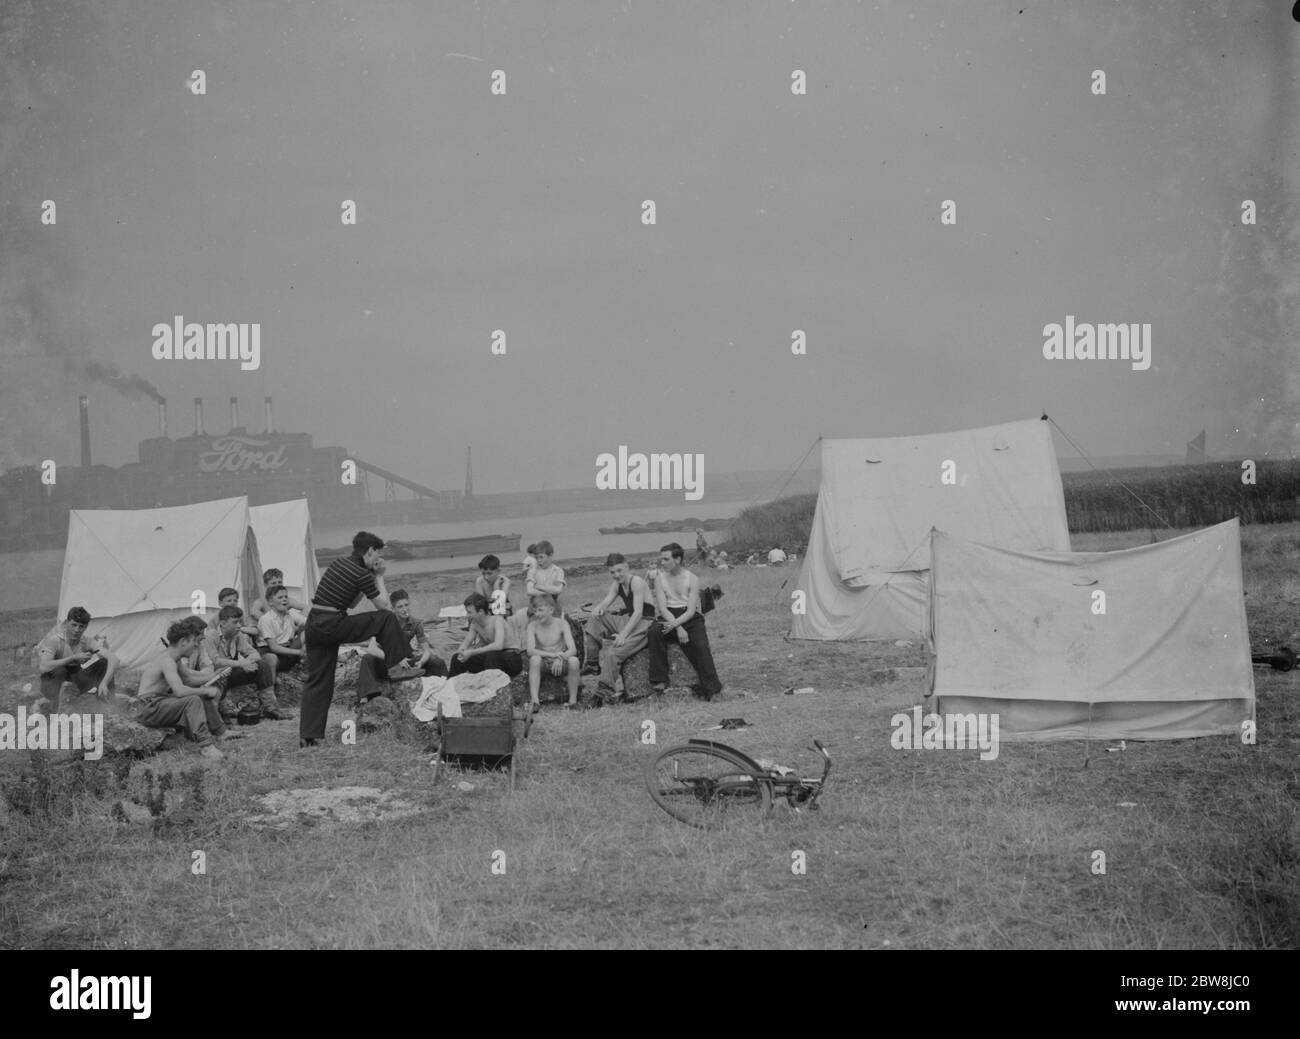 Arme Jungs Camp am Flussufer, Woolwich. August 1937 Stockfoto